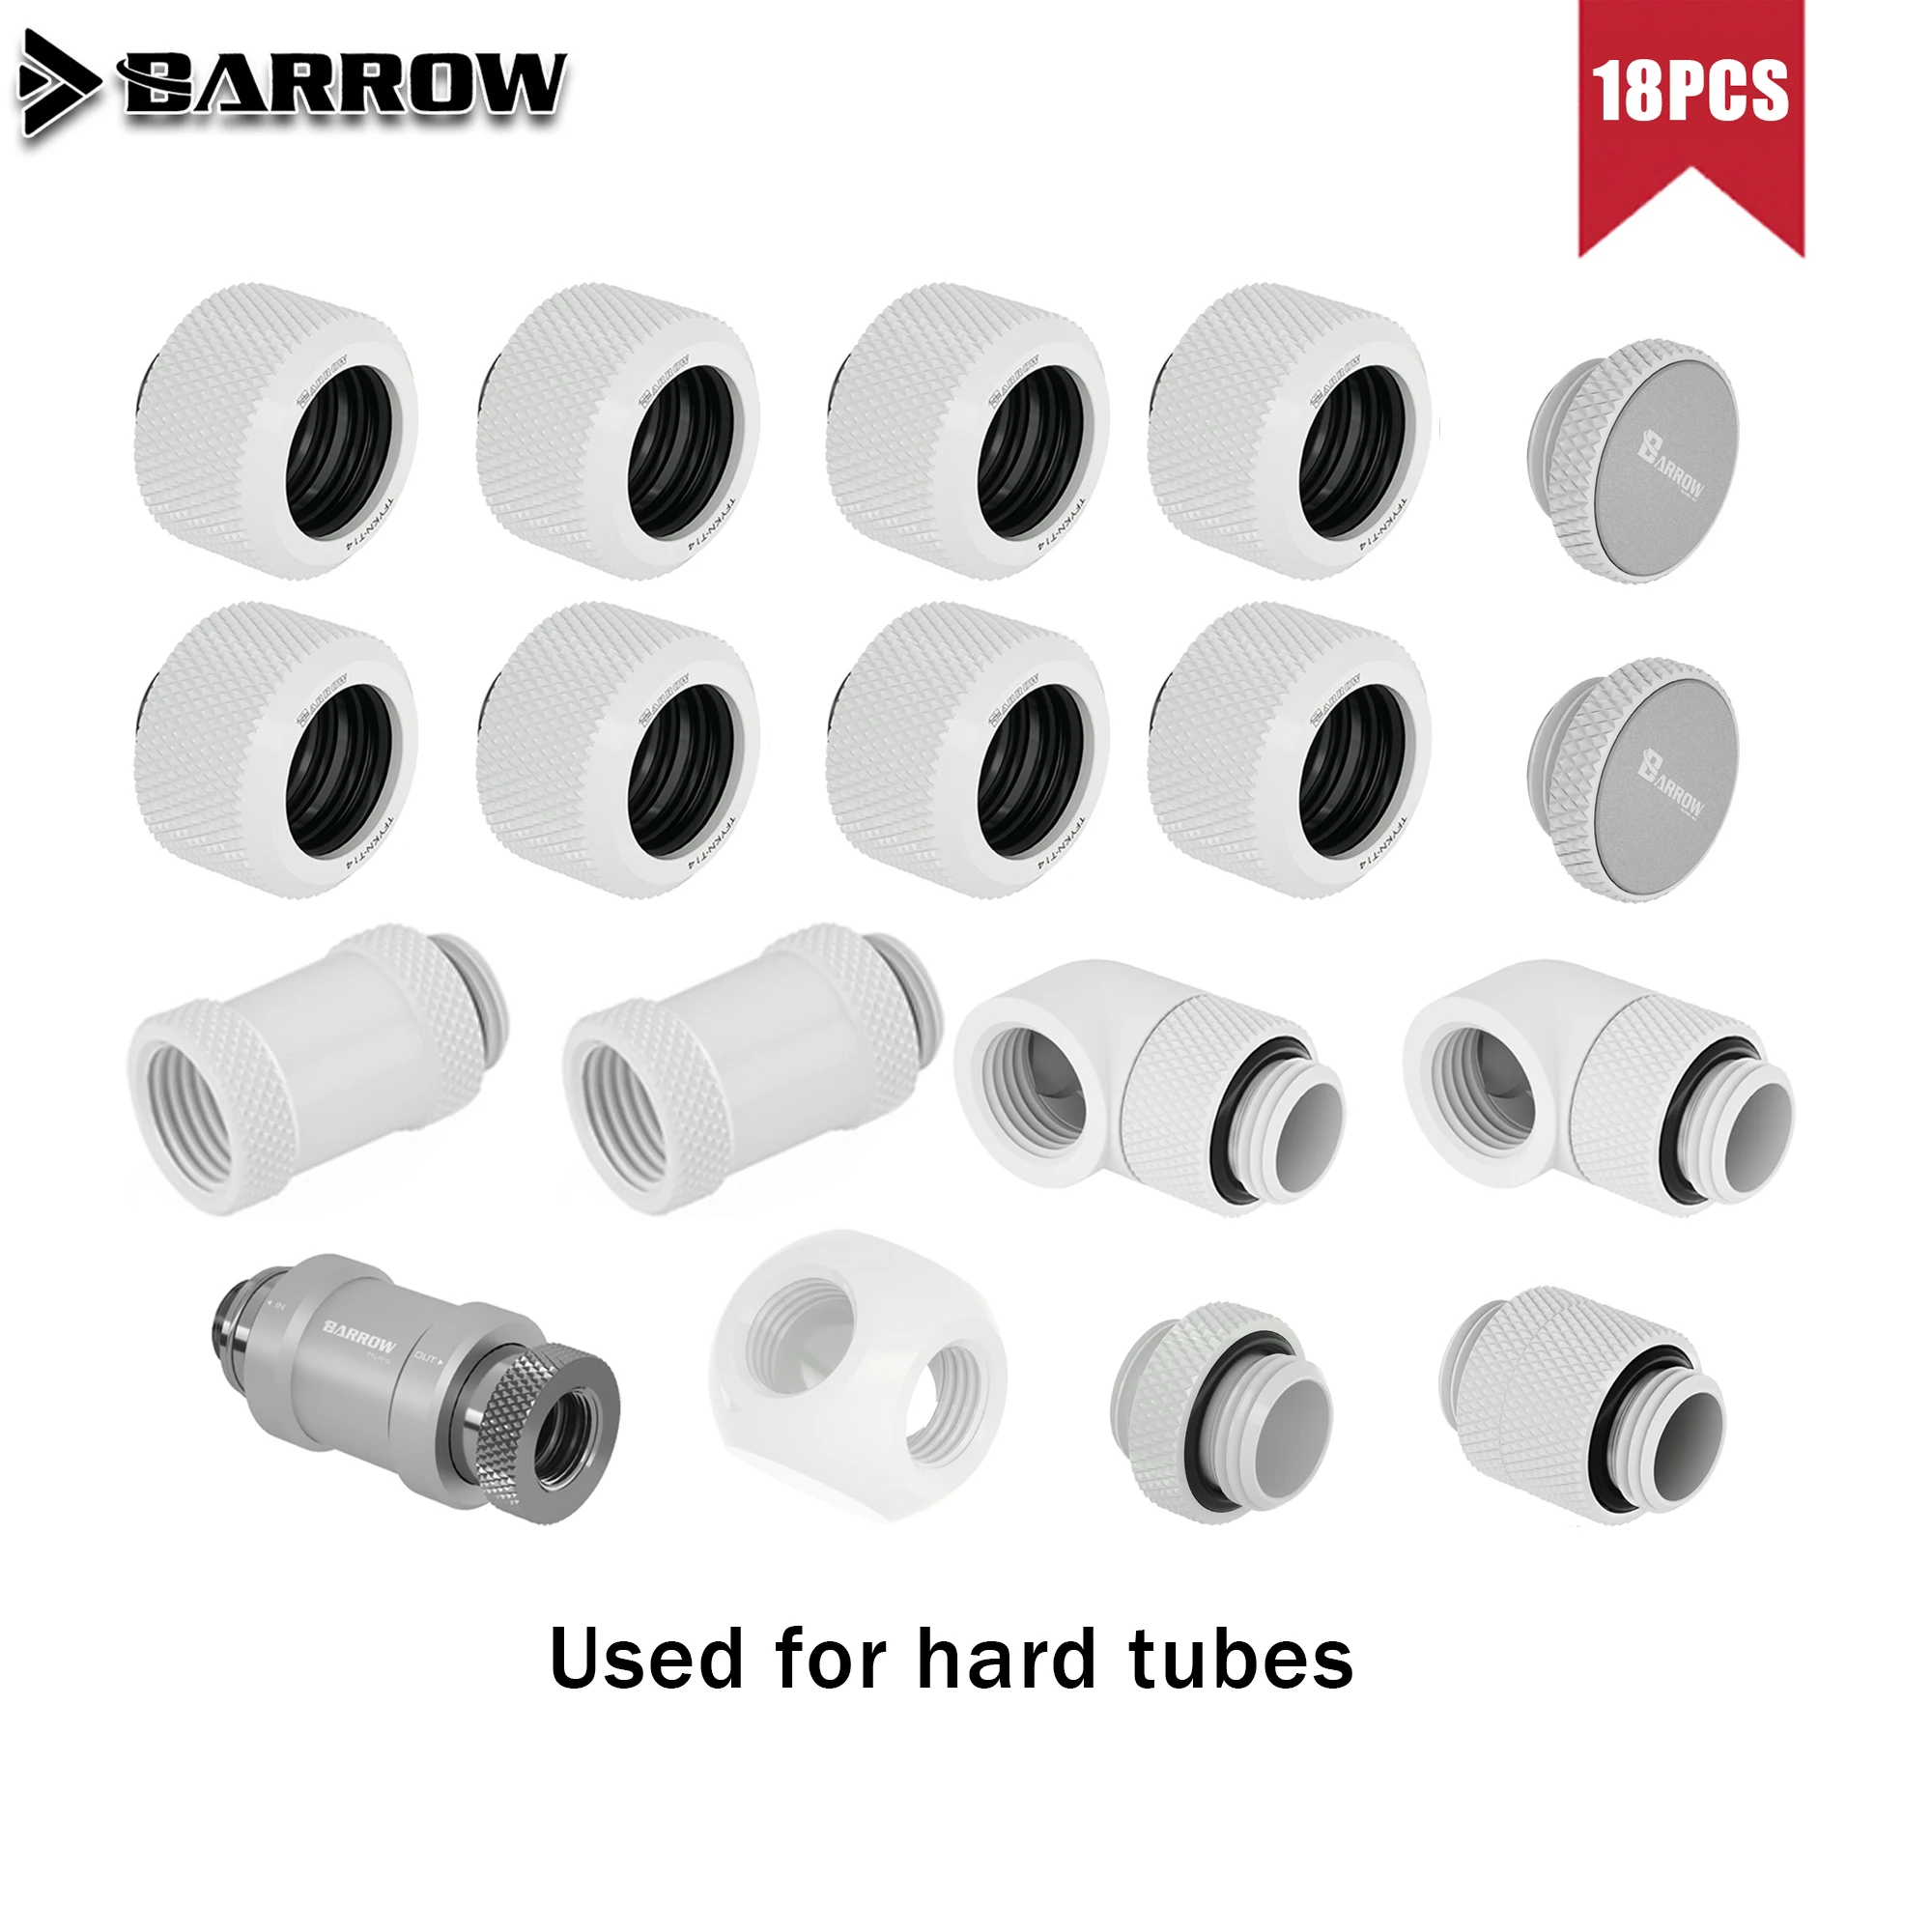 BARROW Fitting 90 Degree Hard Tube Fittings Water Cooling Pc Computer Accessories Water Cooling Kit DIY G'1/4 Thread Accessories enlarge